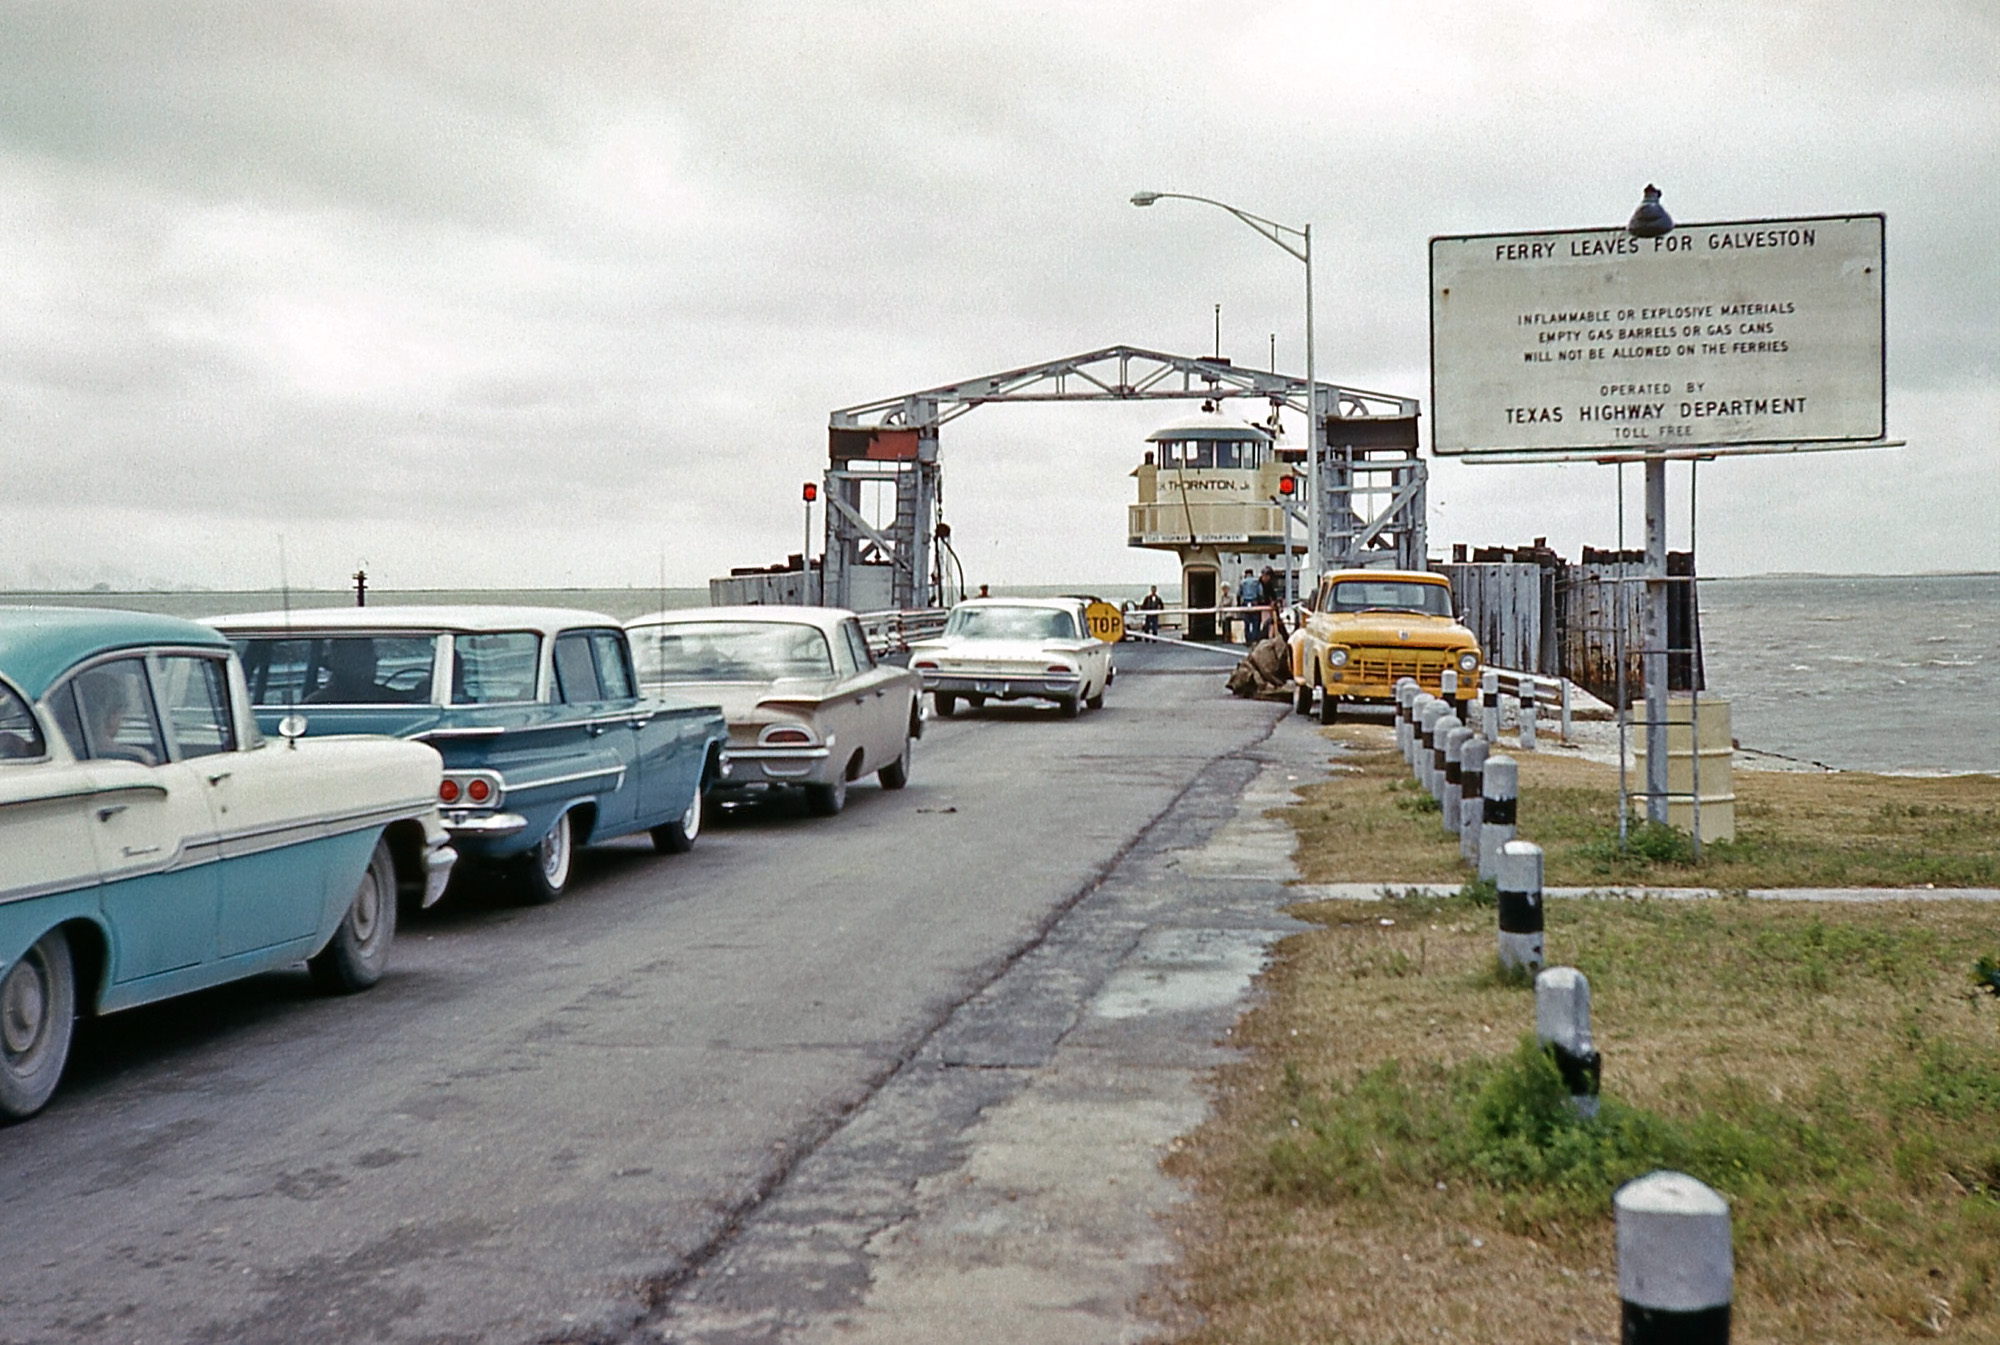 Another Galveston-related photo taken by my father in Nov. 1960. View full size.